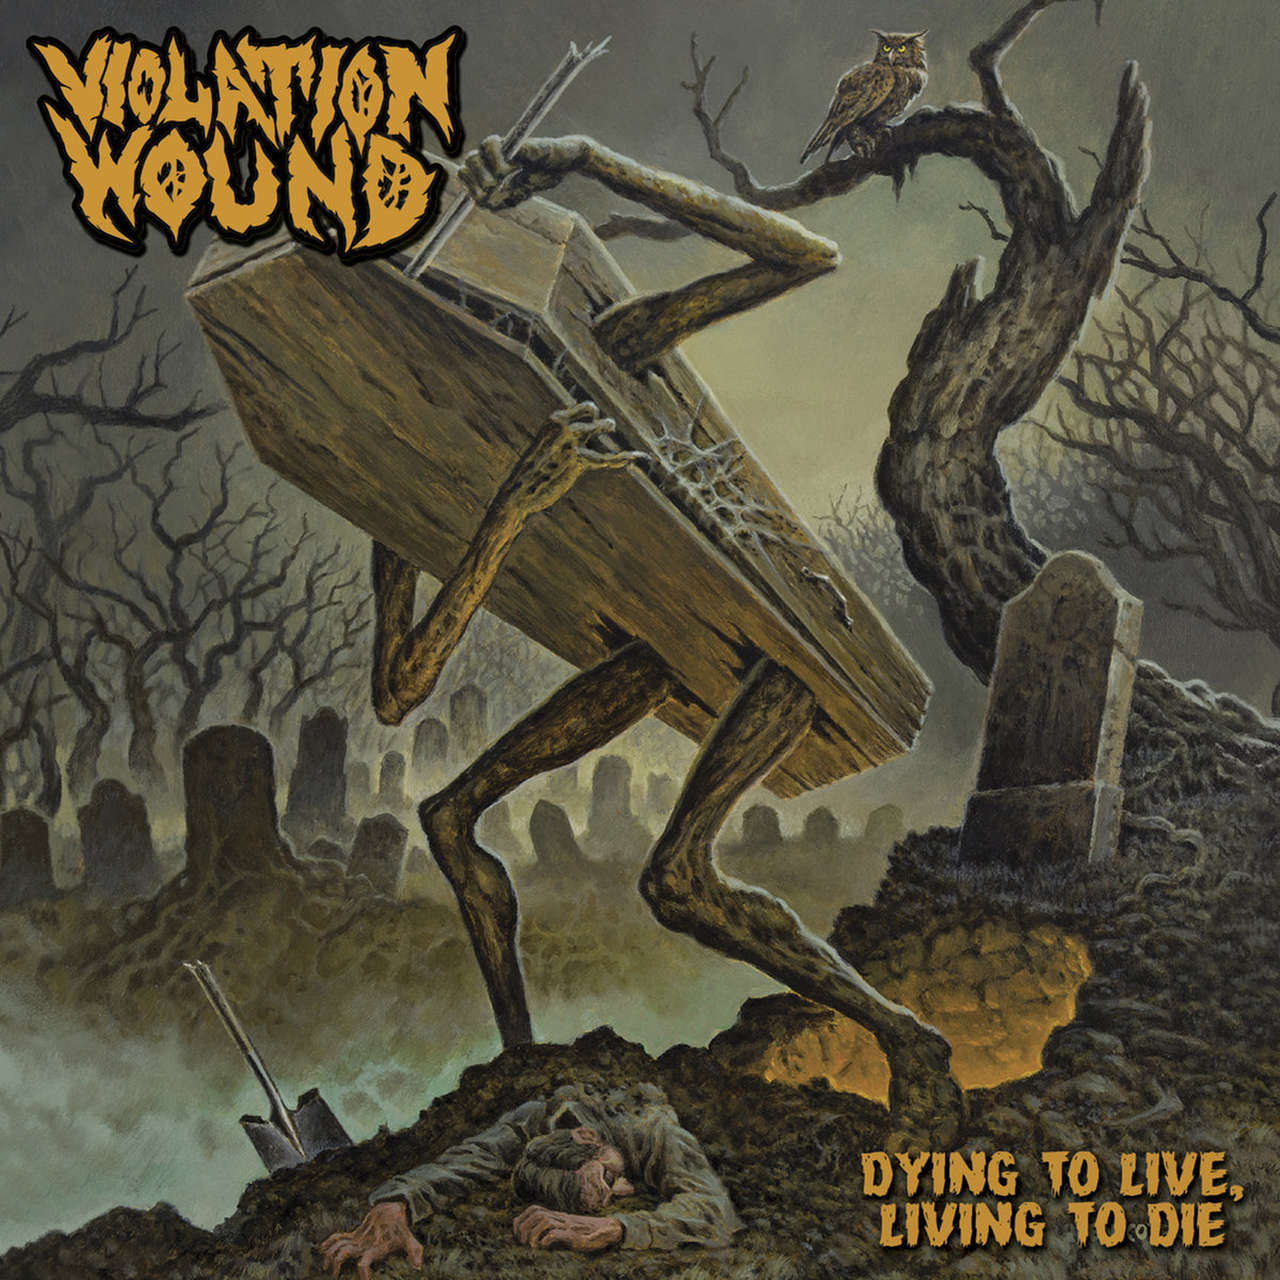 Violation Wound - Dying to Live, Living to Die (Digipak CD)